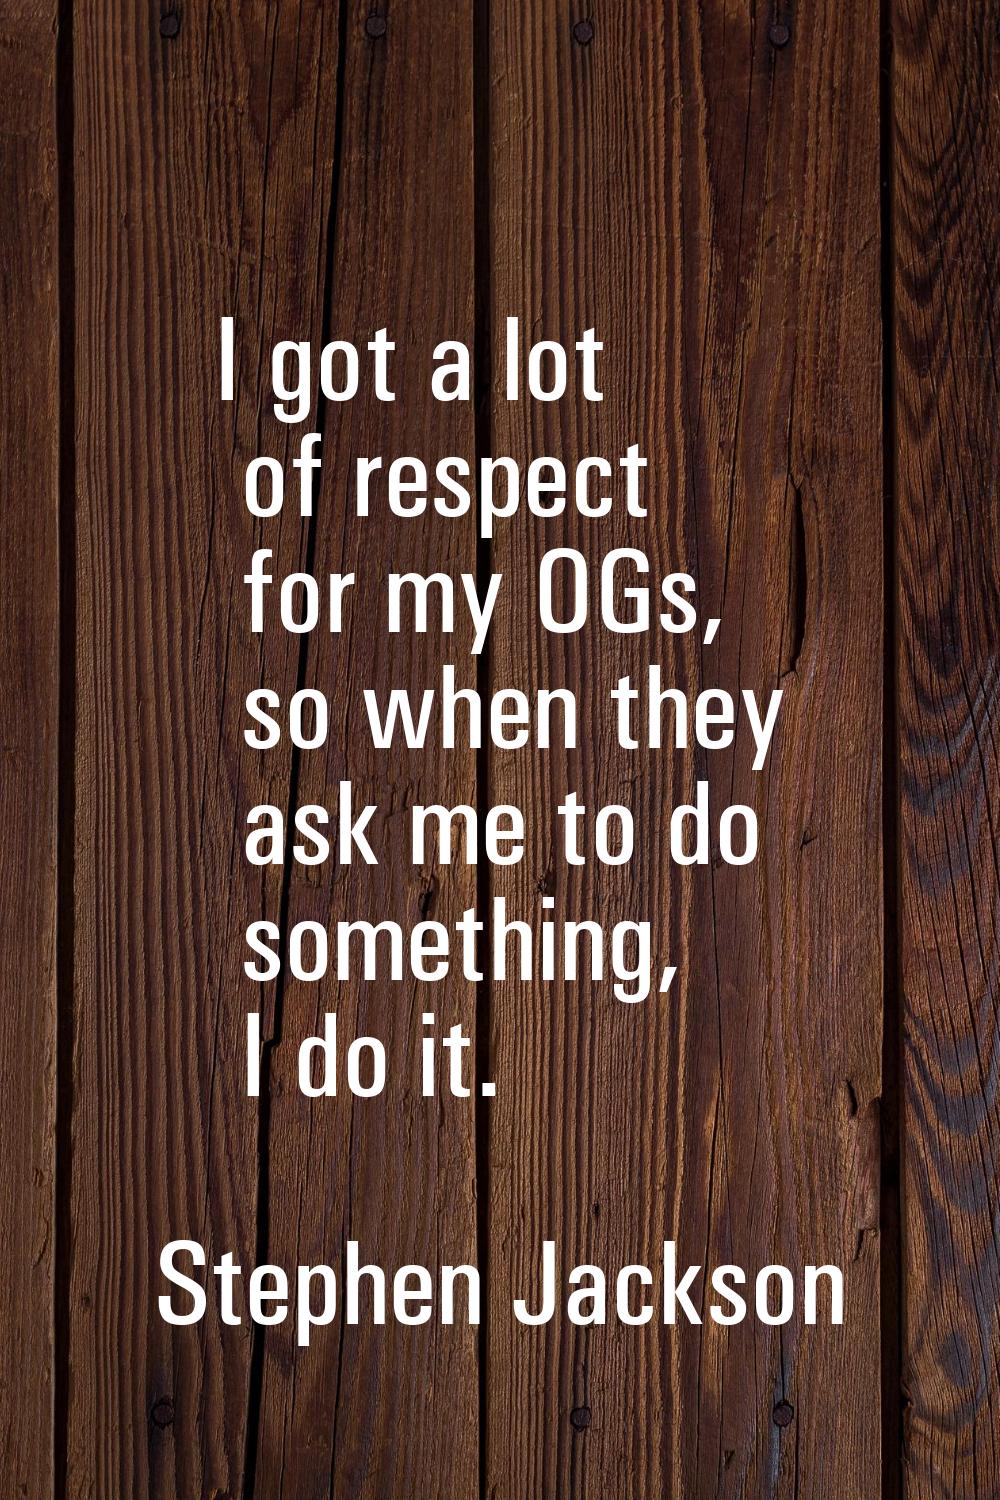 I got a lot of respect for my OGs, so when they ask me to do something, I do it.